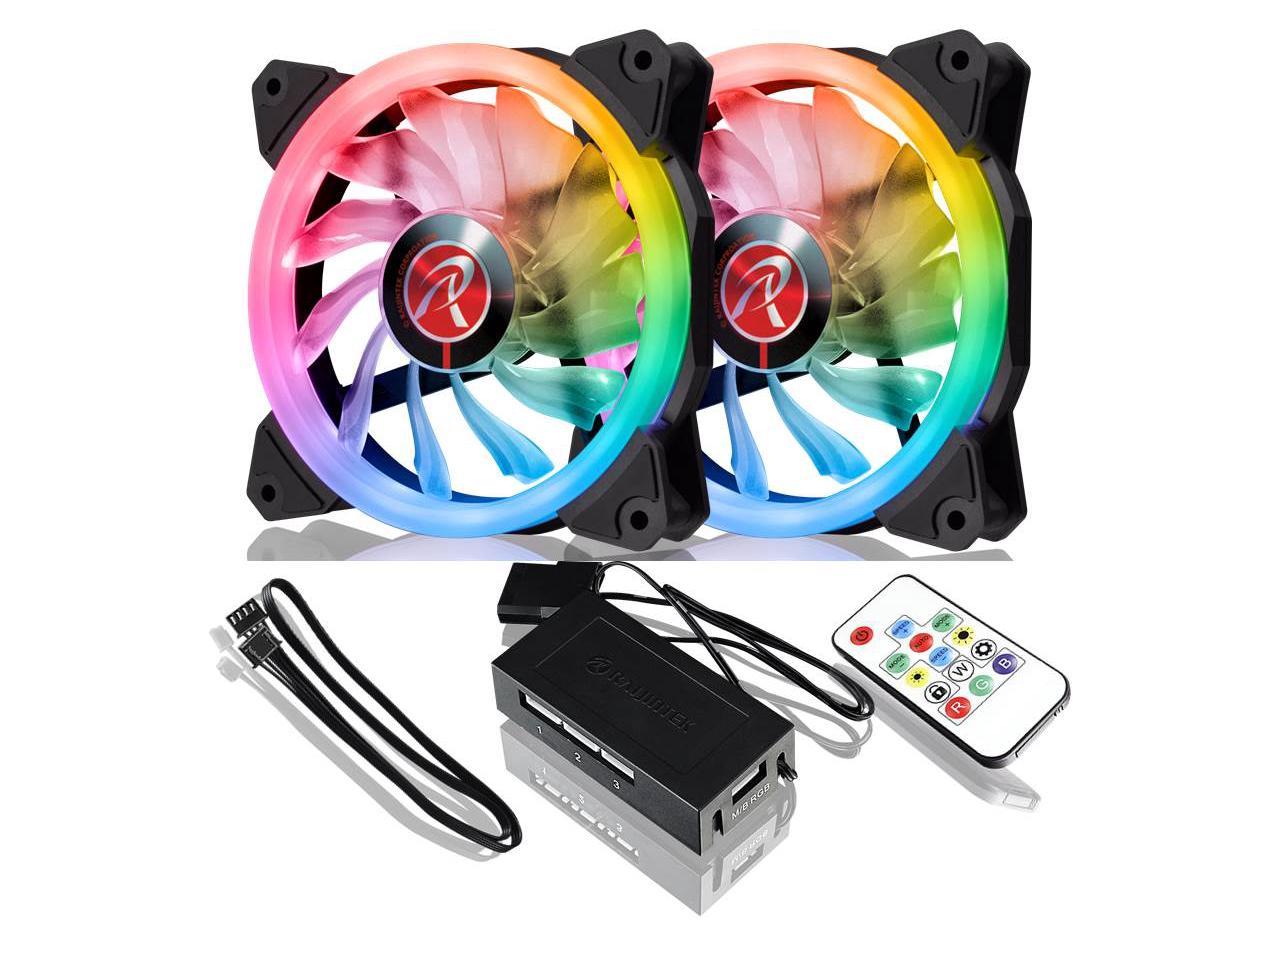 IRIS 12 RBW ADD -2 pack, 12025 Addressable RGB PWM fan, with 8 port Addressable LED hub, Remote controller & Connecting M/B cable, compatible with ASUS/MSI 5V ADD header